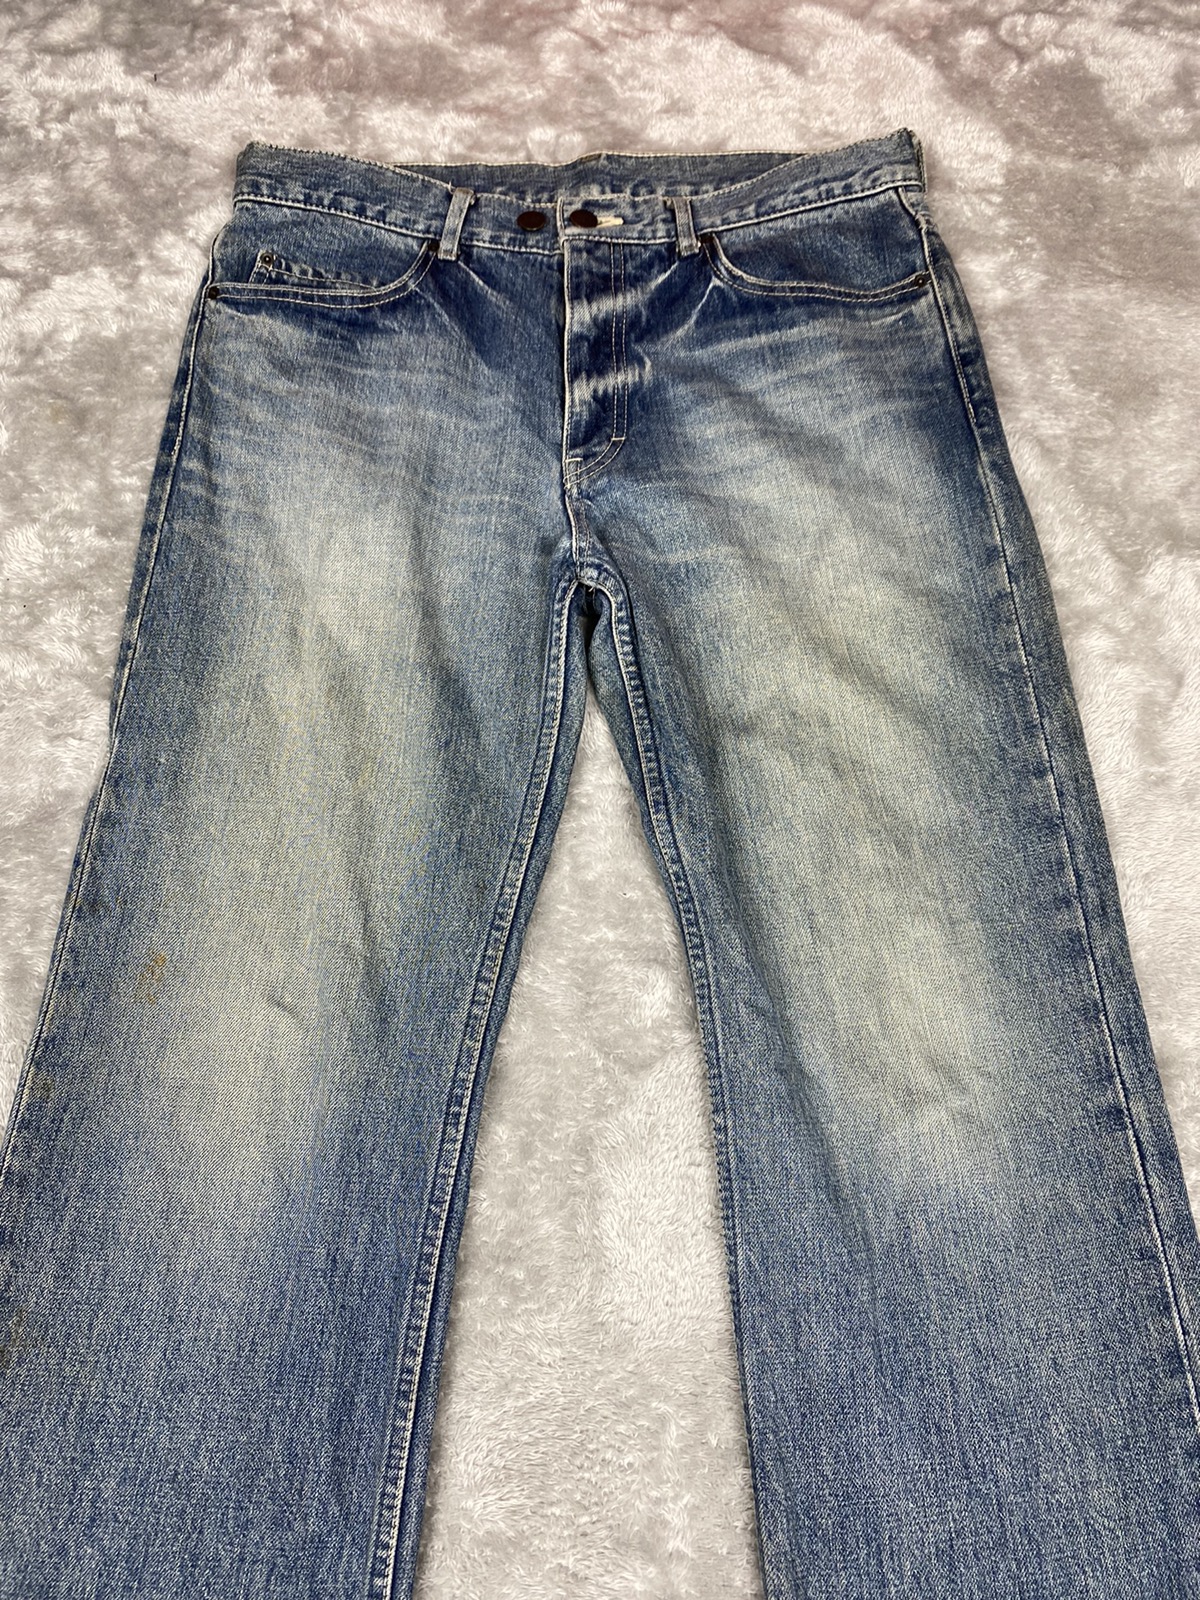 N. Hollywood Denim Faded Jeans. S0208 - 3